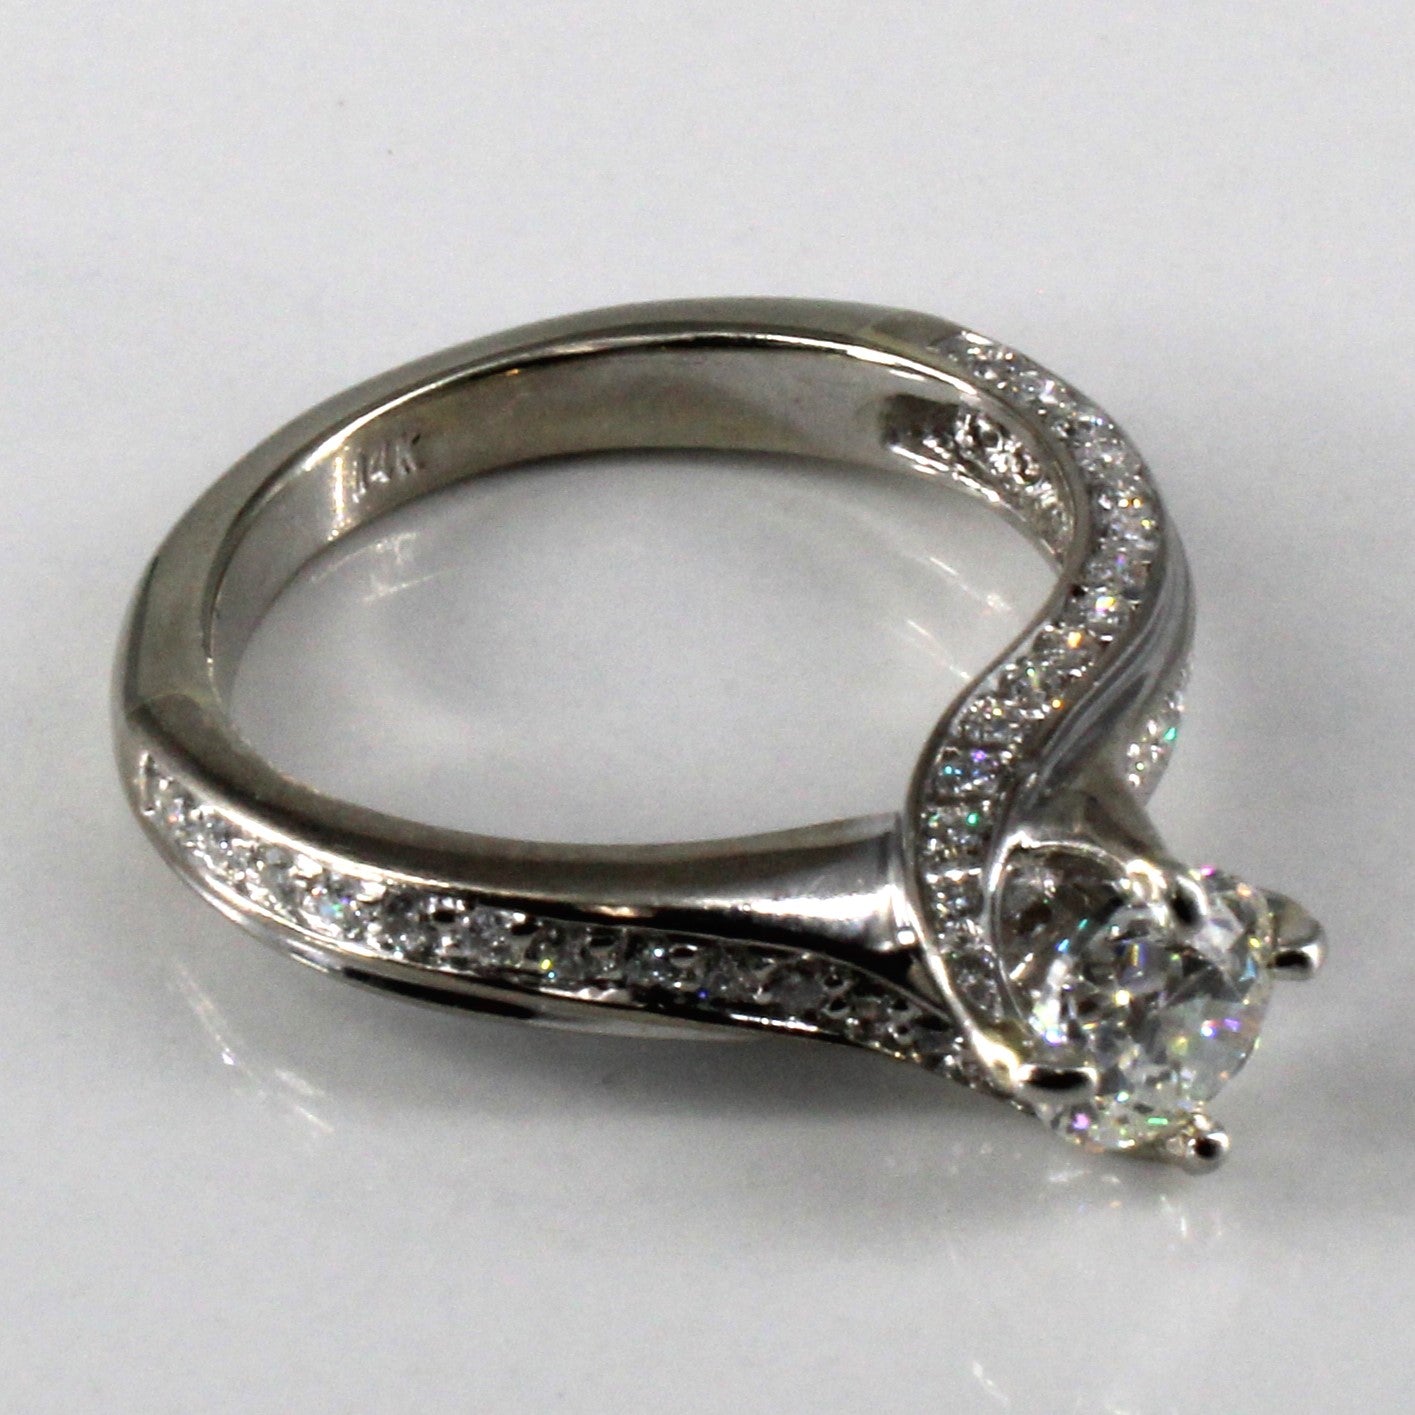 Bypass Solitaire Diamond with Accents Engagement Ring | 0.88ctw | SZ 4.5 |